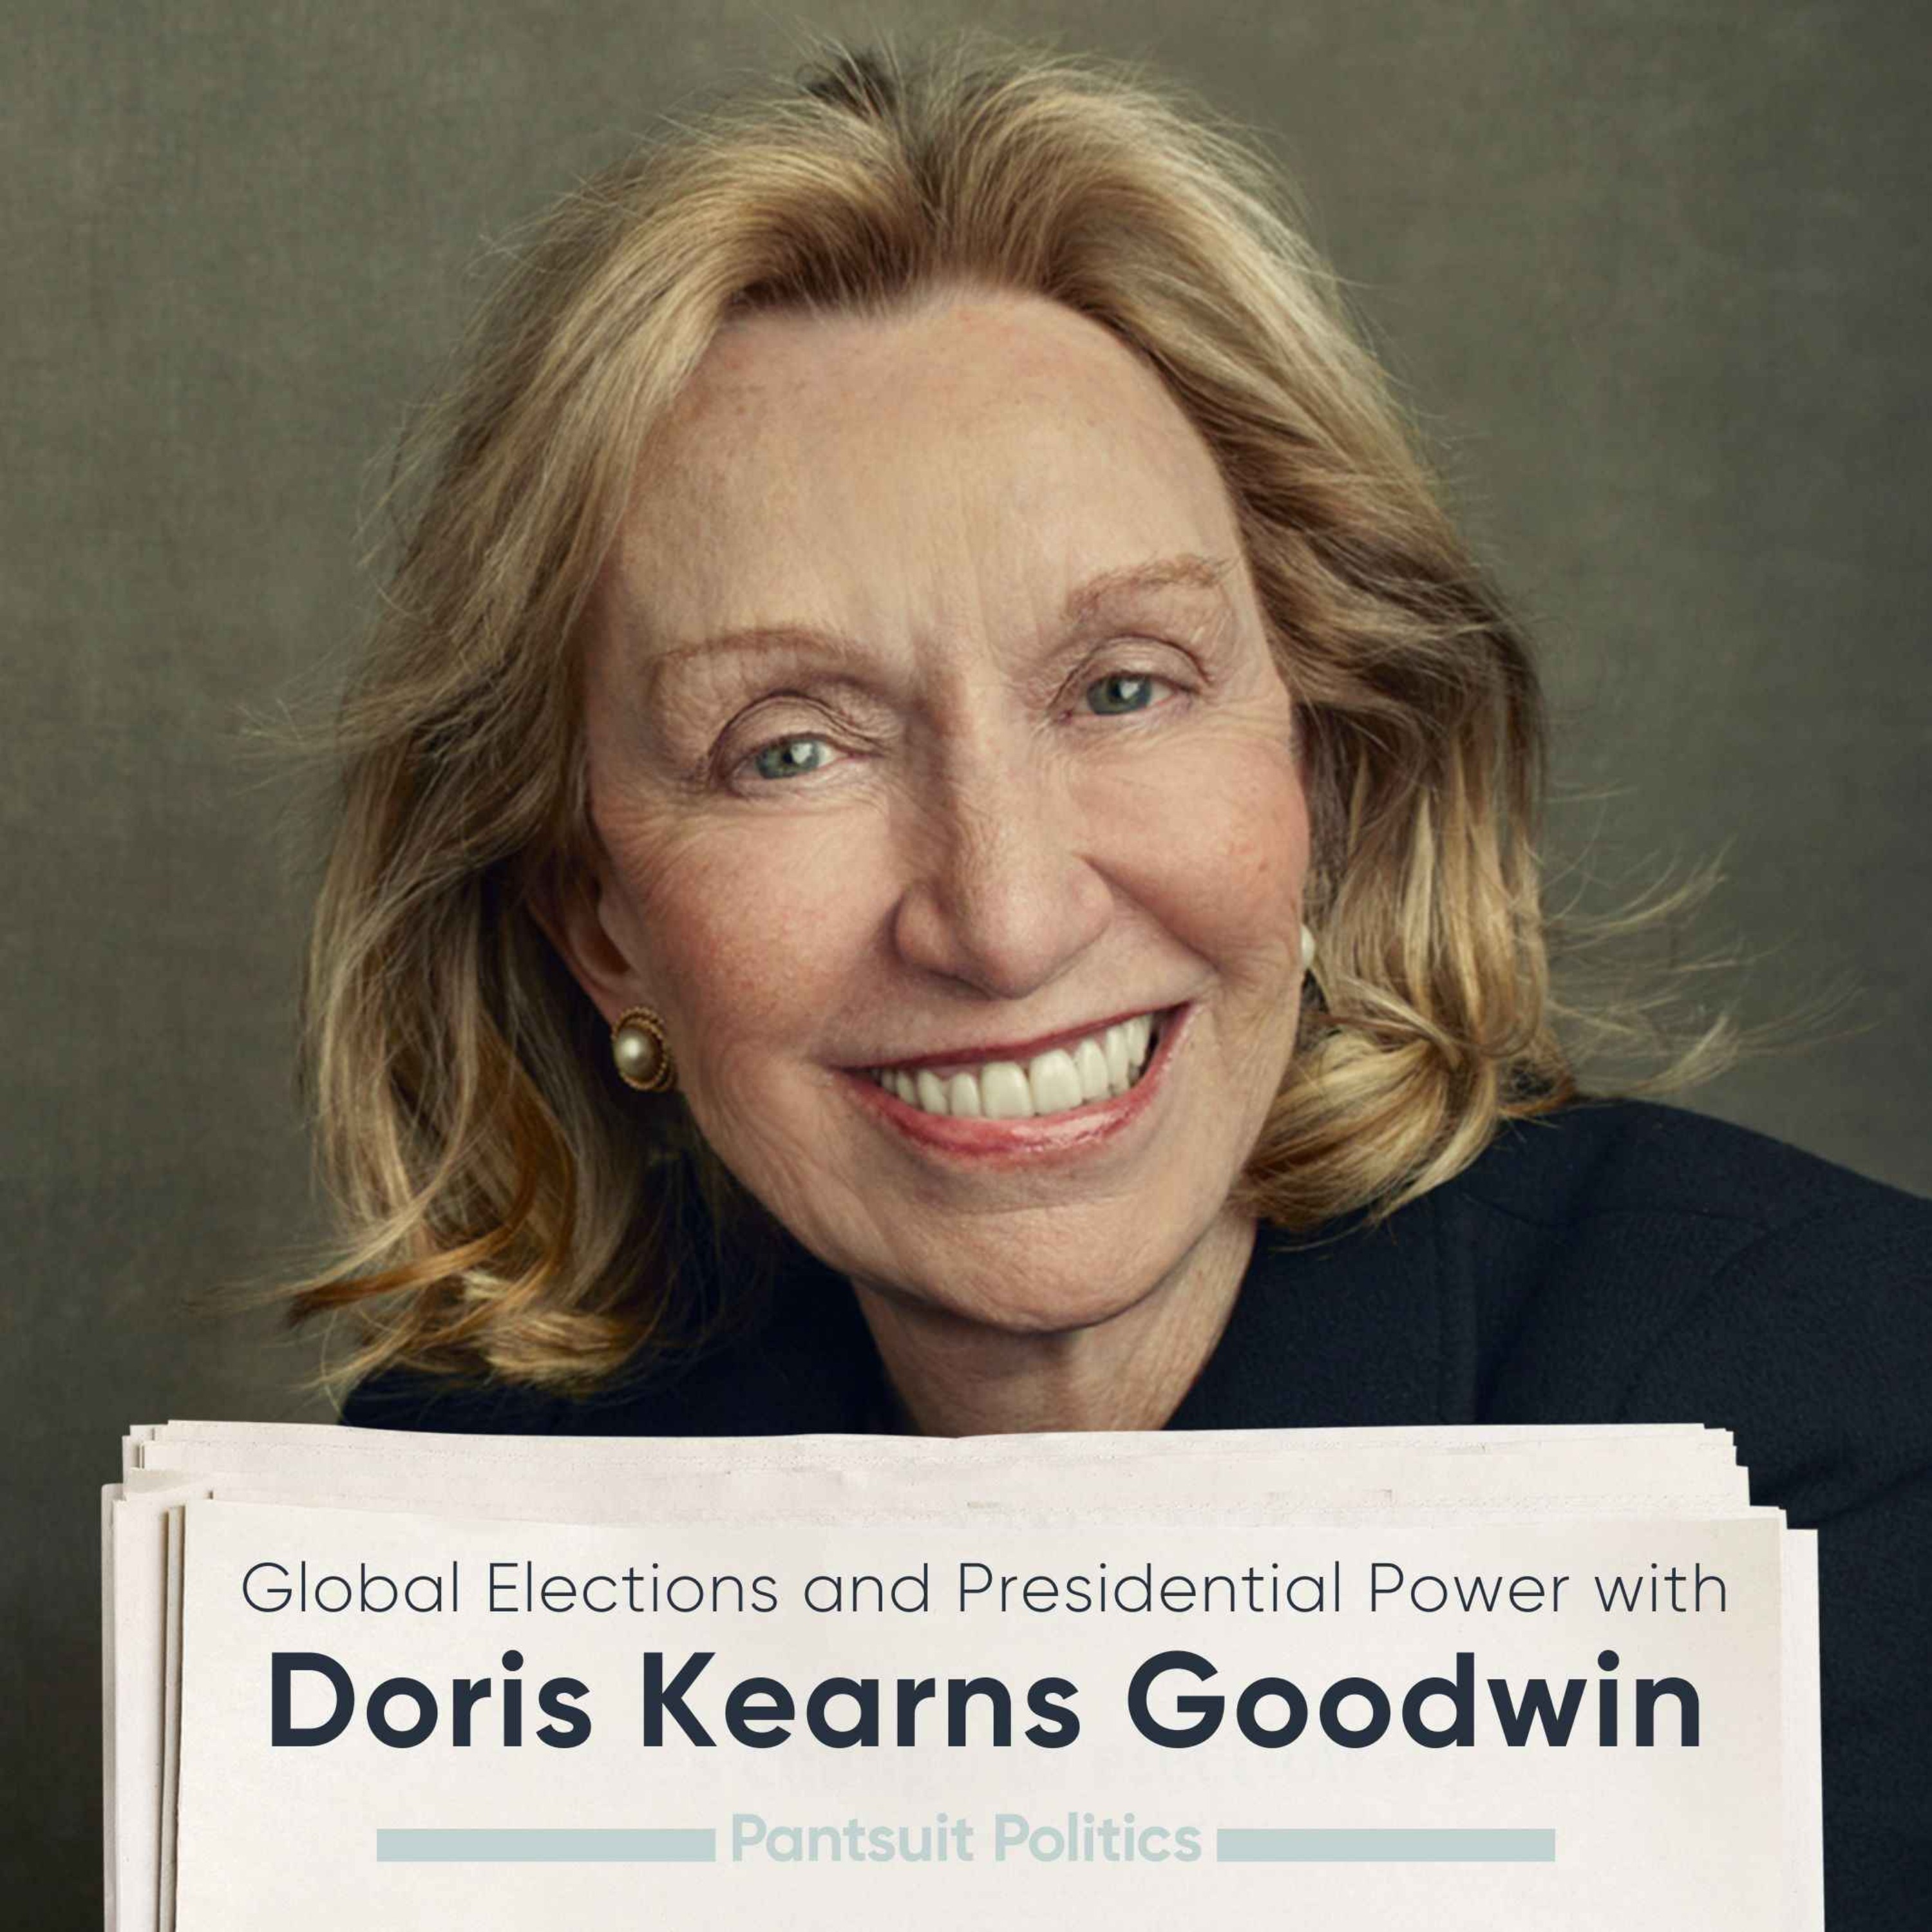 Global Elections and Presidential Power with Doris Kearns Goodwin